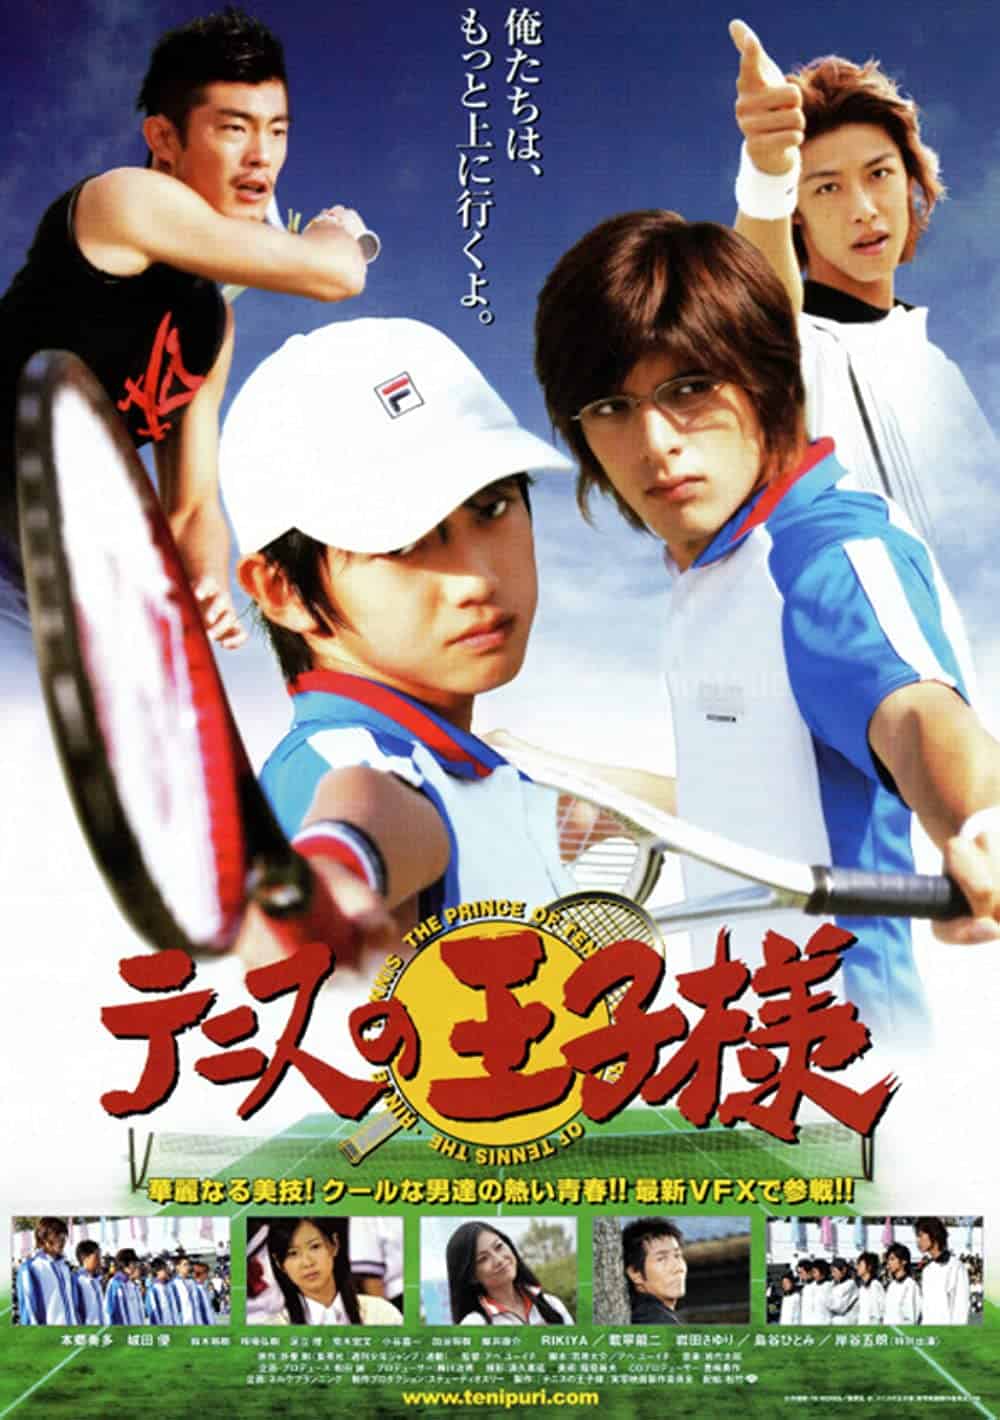 The Prince of Tennis (2006) Best Tennis Movies to Add in Your Watchlist